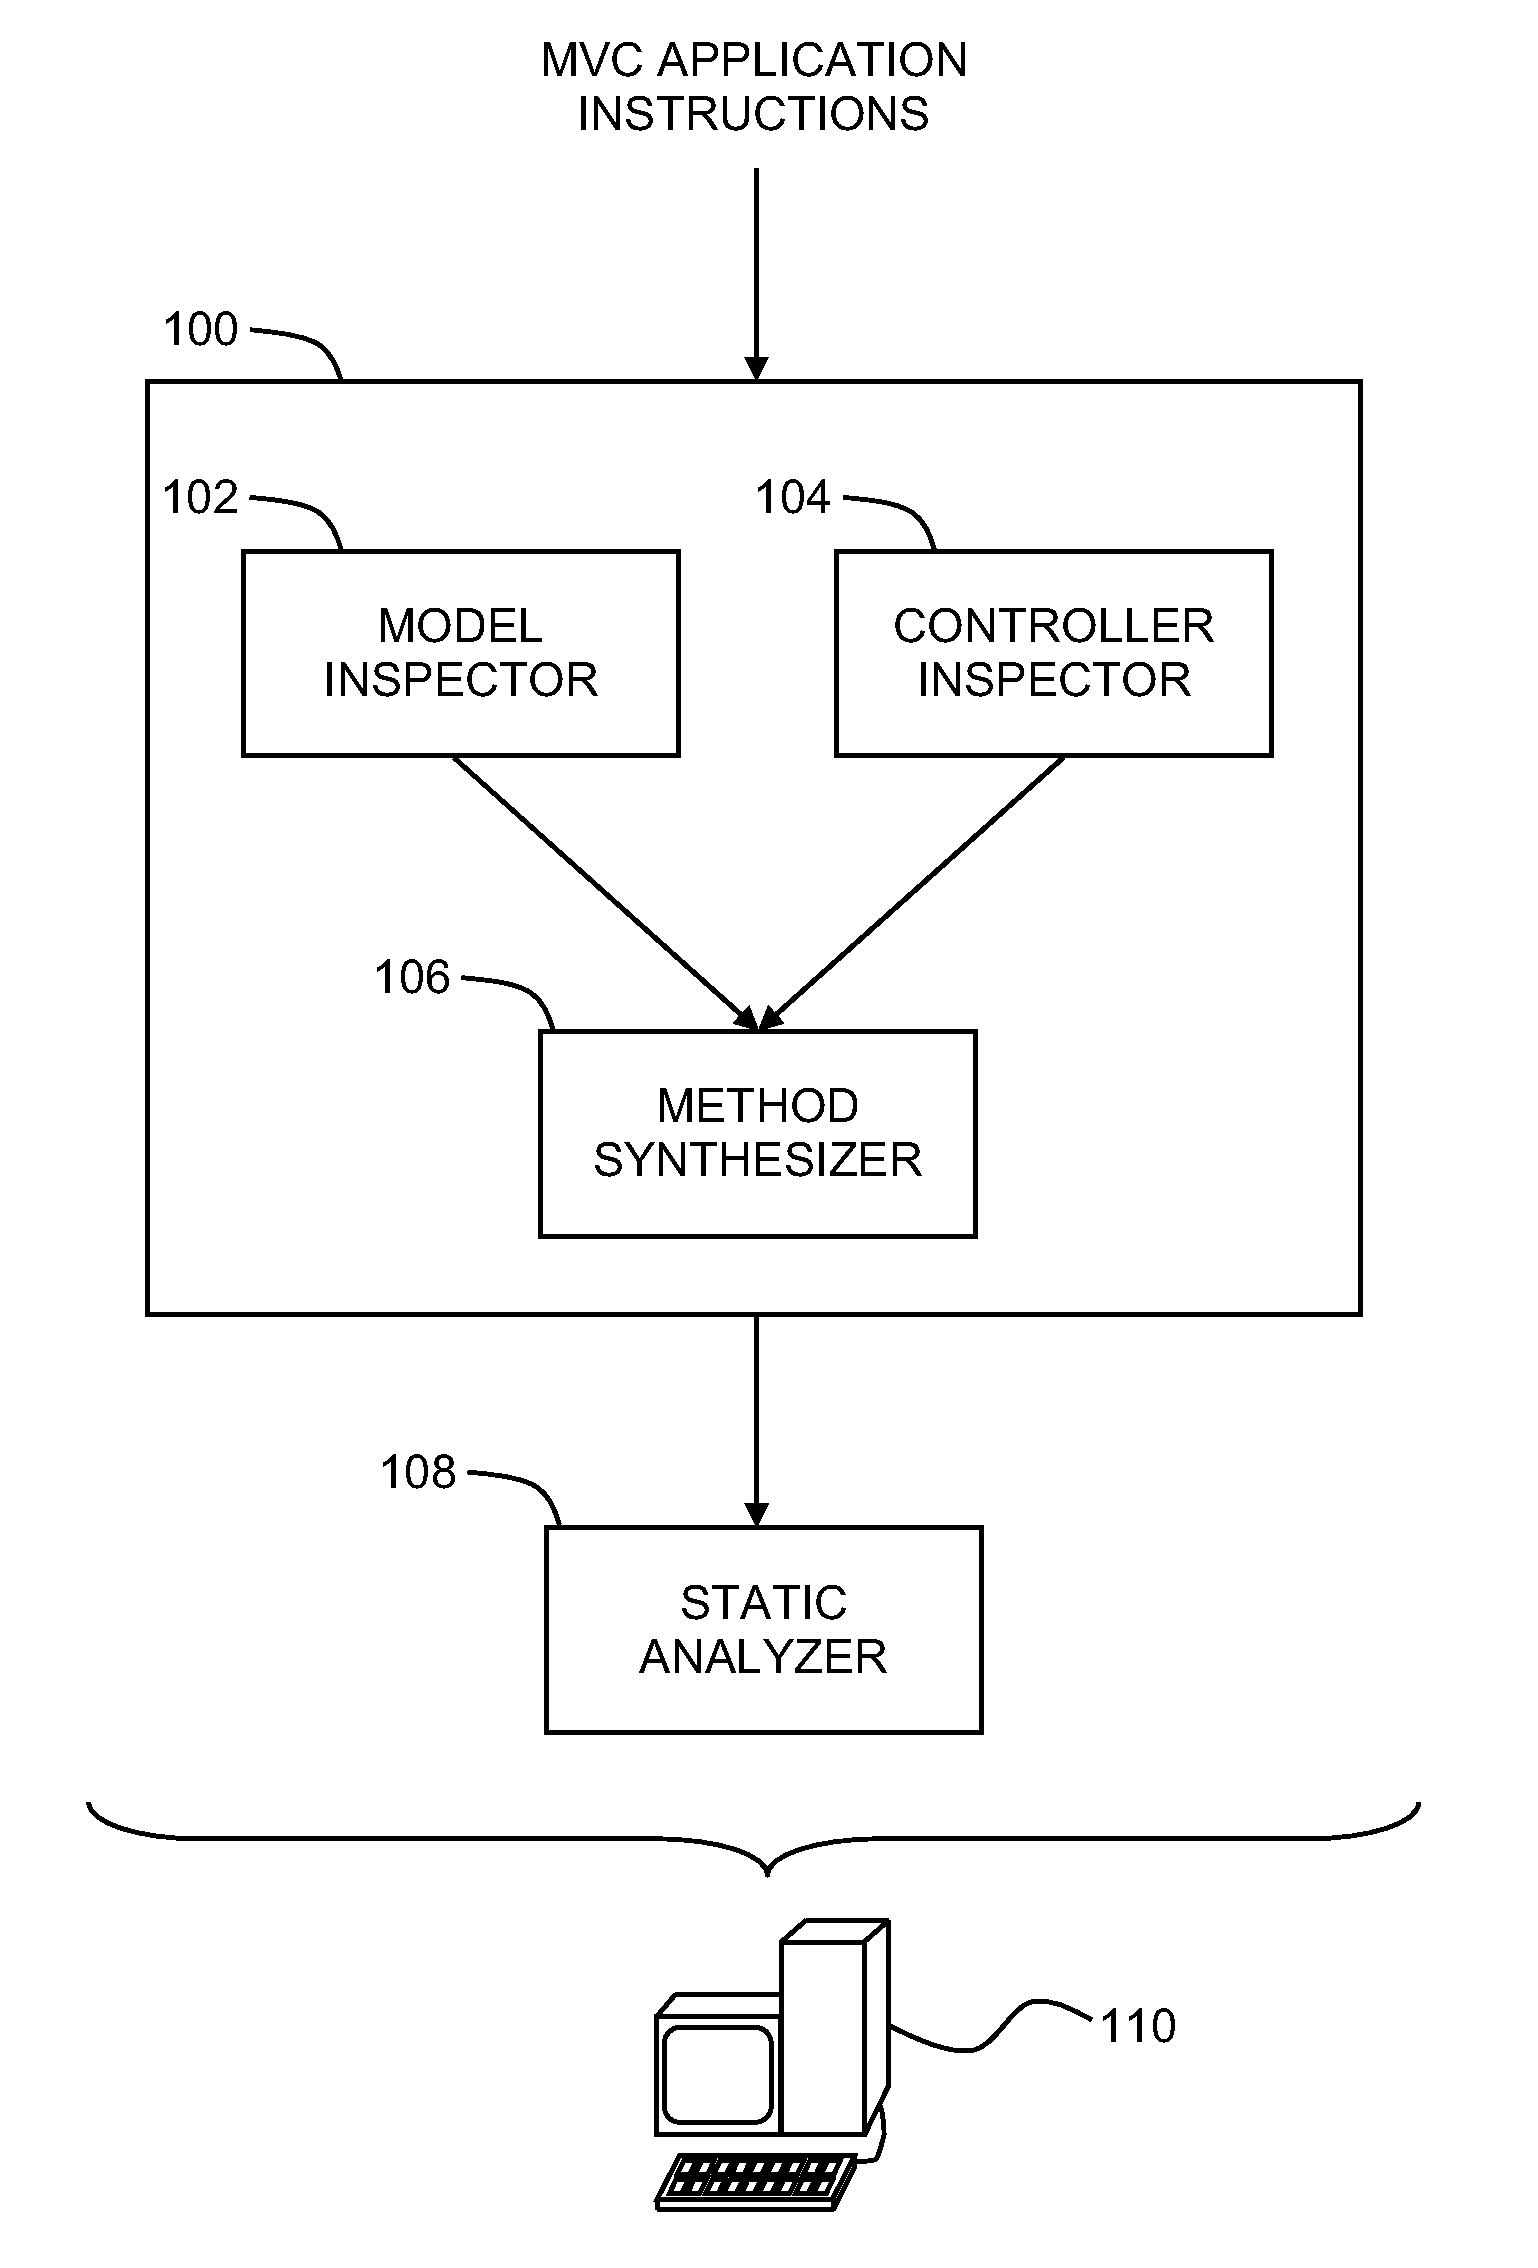 Static Analysis of Computer Software Applications Having A Model-View-Controller Architecture